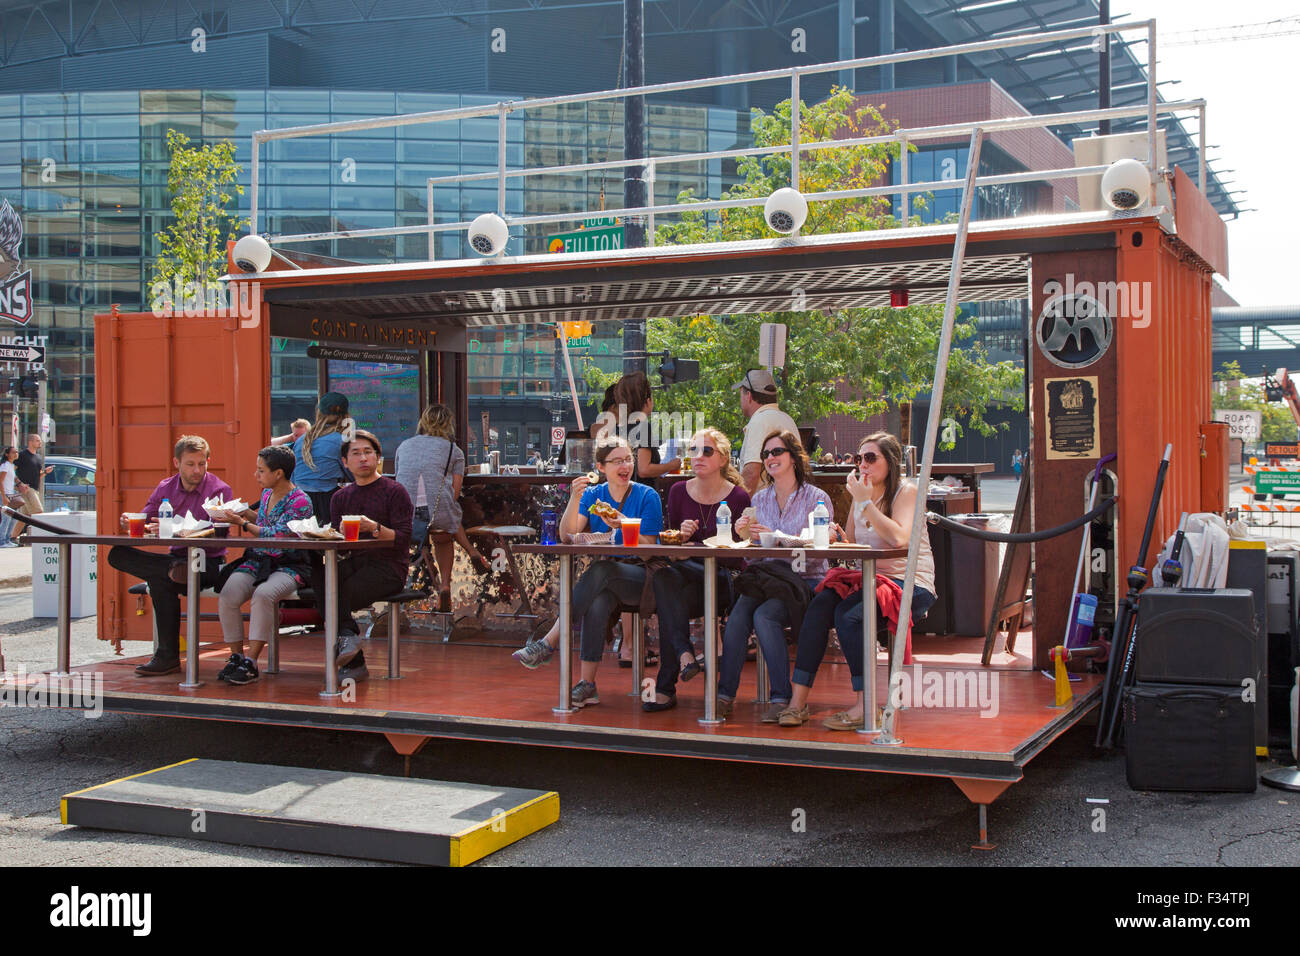 https://c8.alamy.com/comp/F34TPJ/grand-rapids-michigan-a-shipping-container-converted-to-a-barrestaurant-F34TPJ.jpg